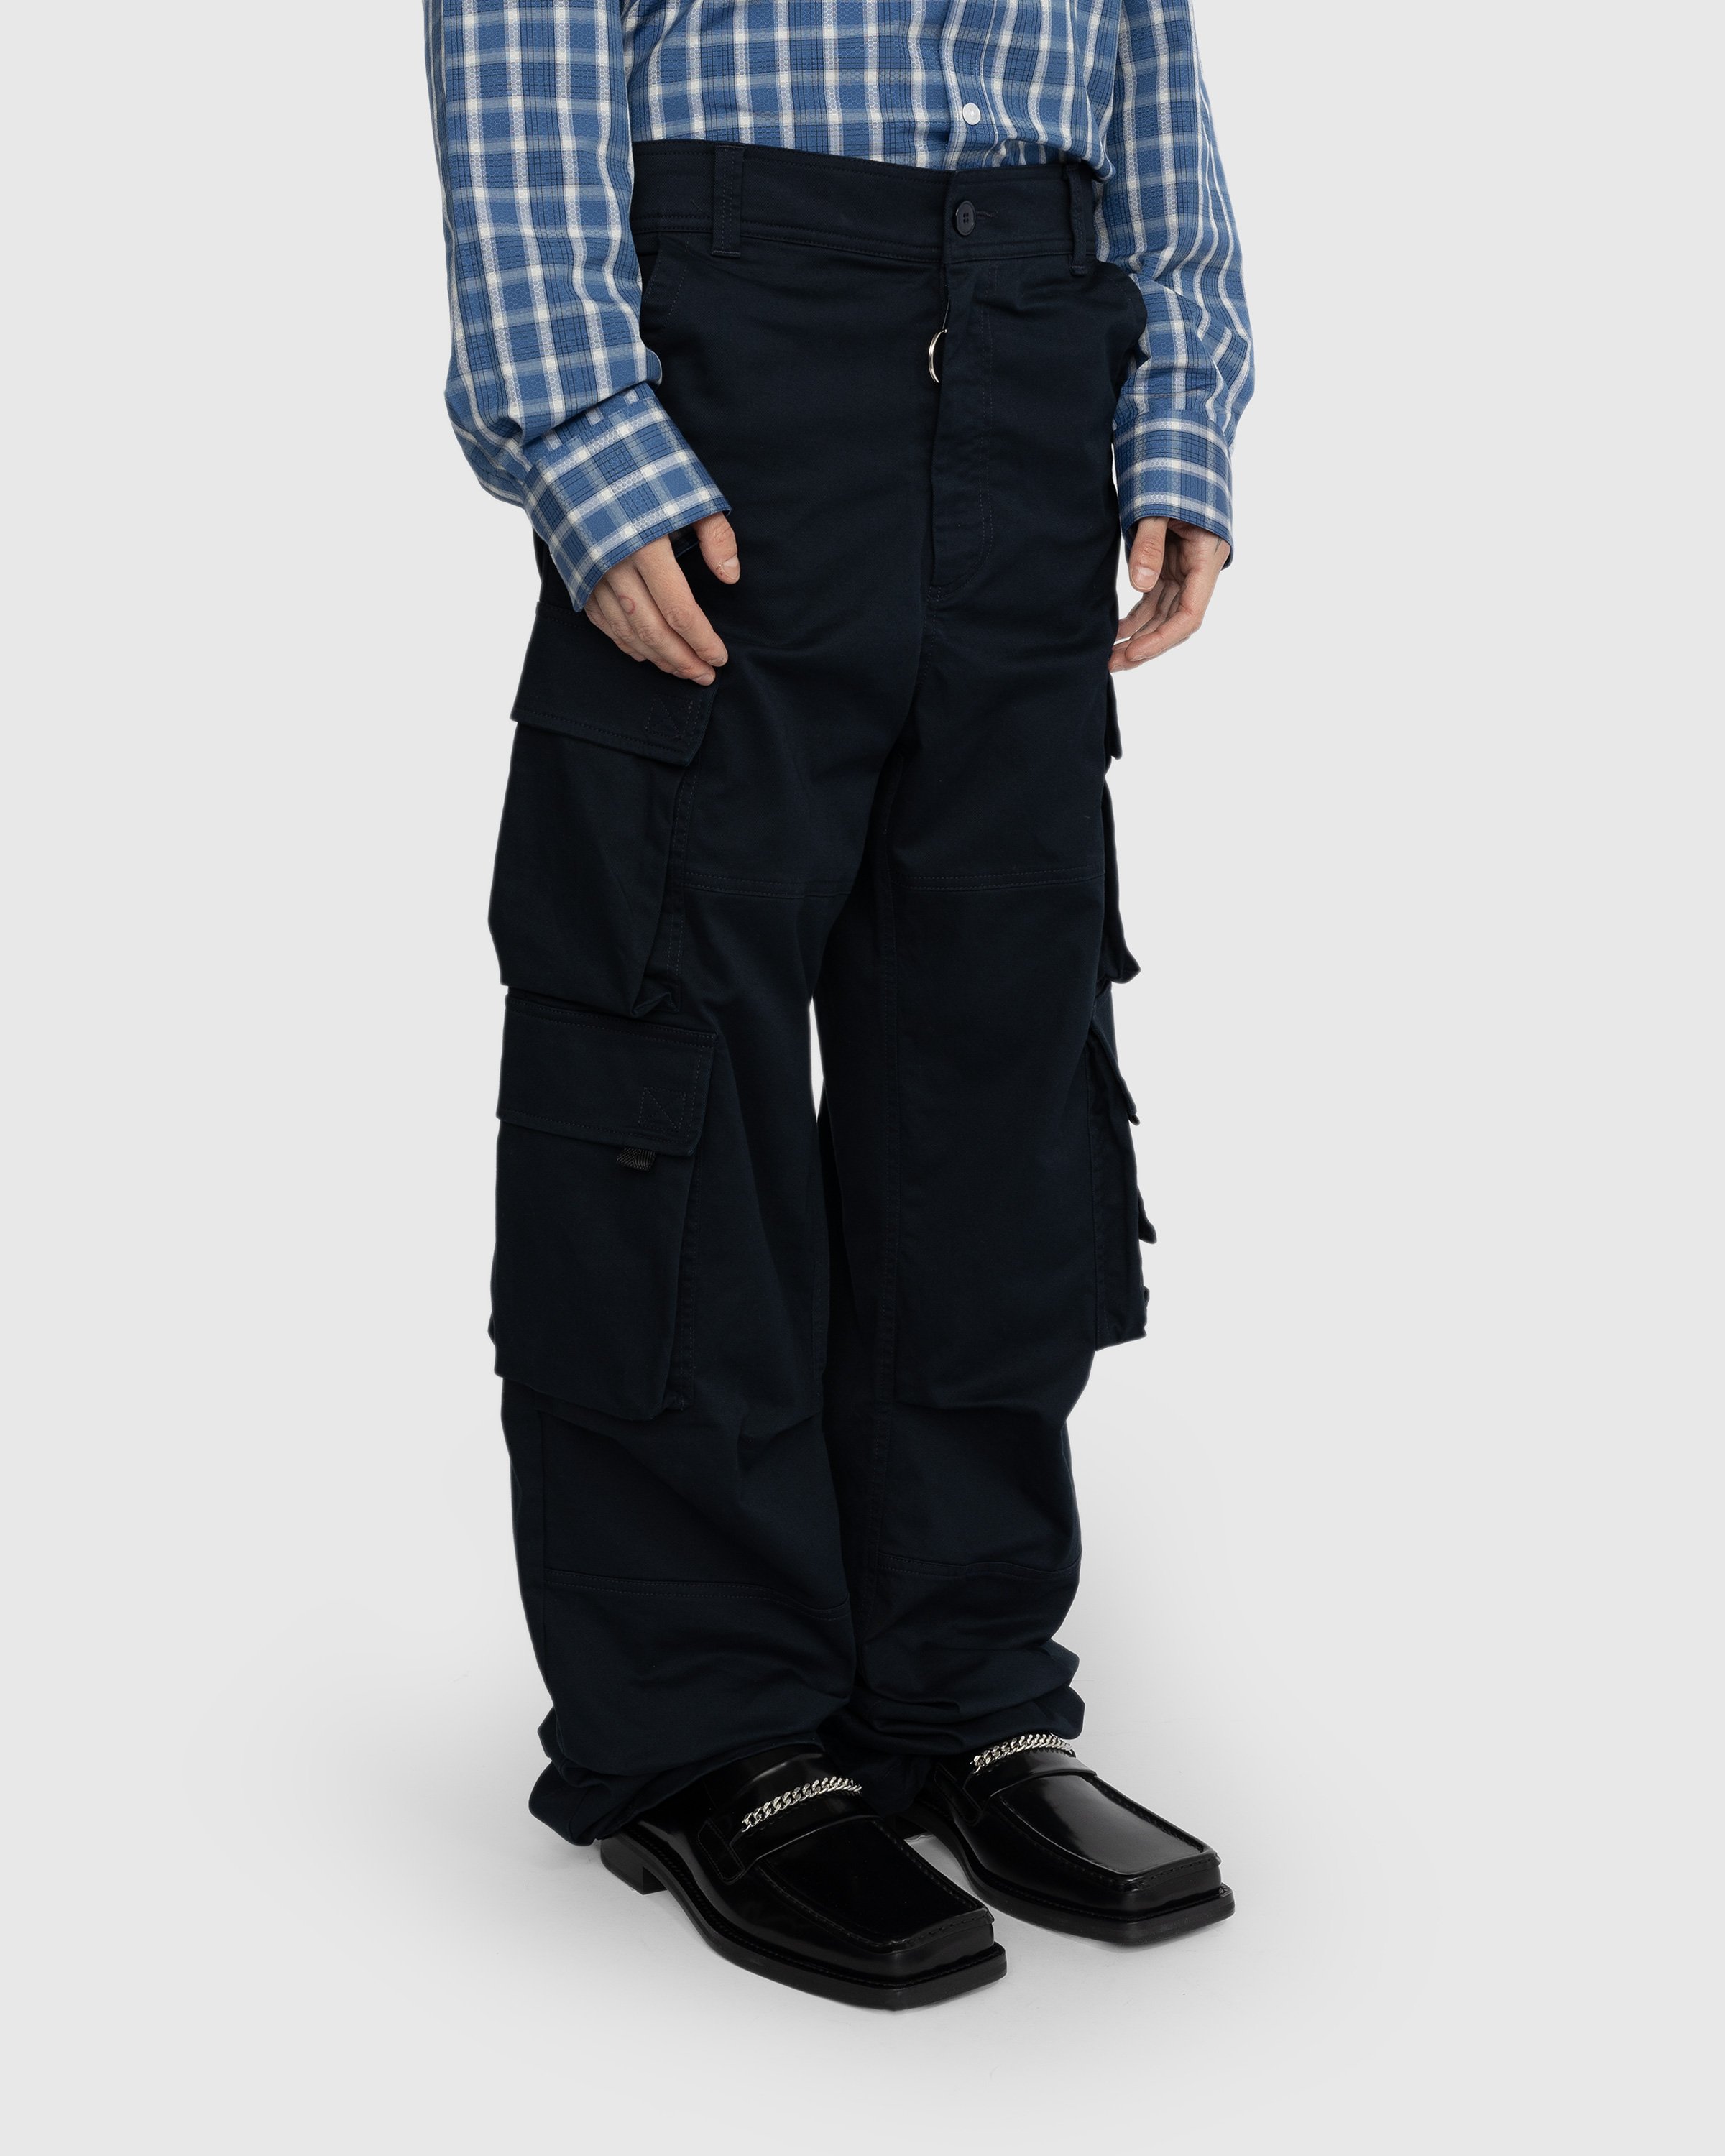 Martine Rose - Pulled Cargo Trouser Navy - Clothing - Blue - Image 4